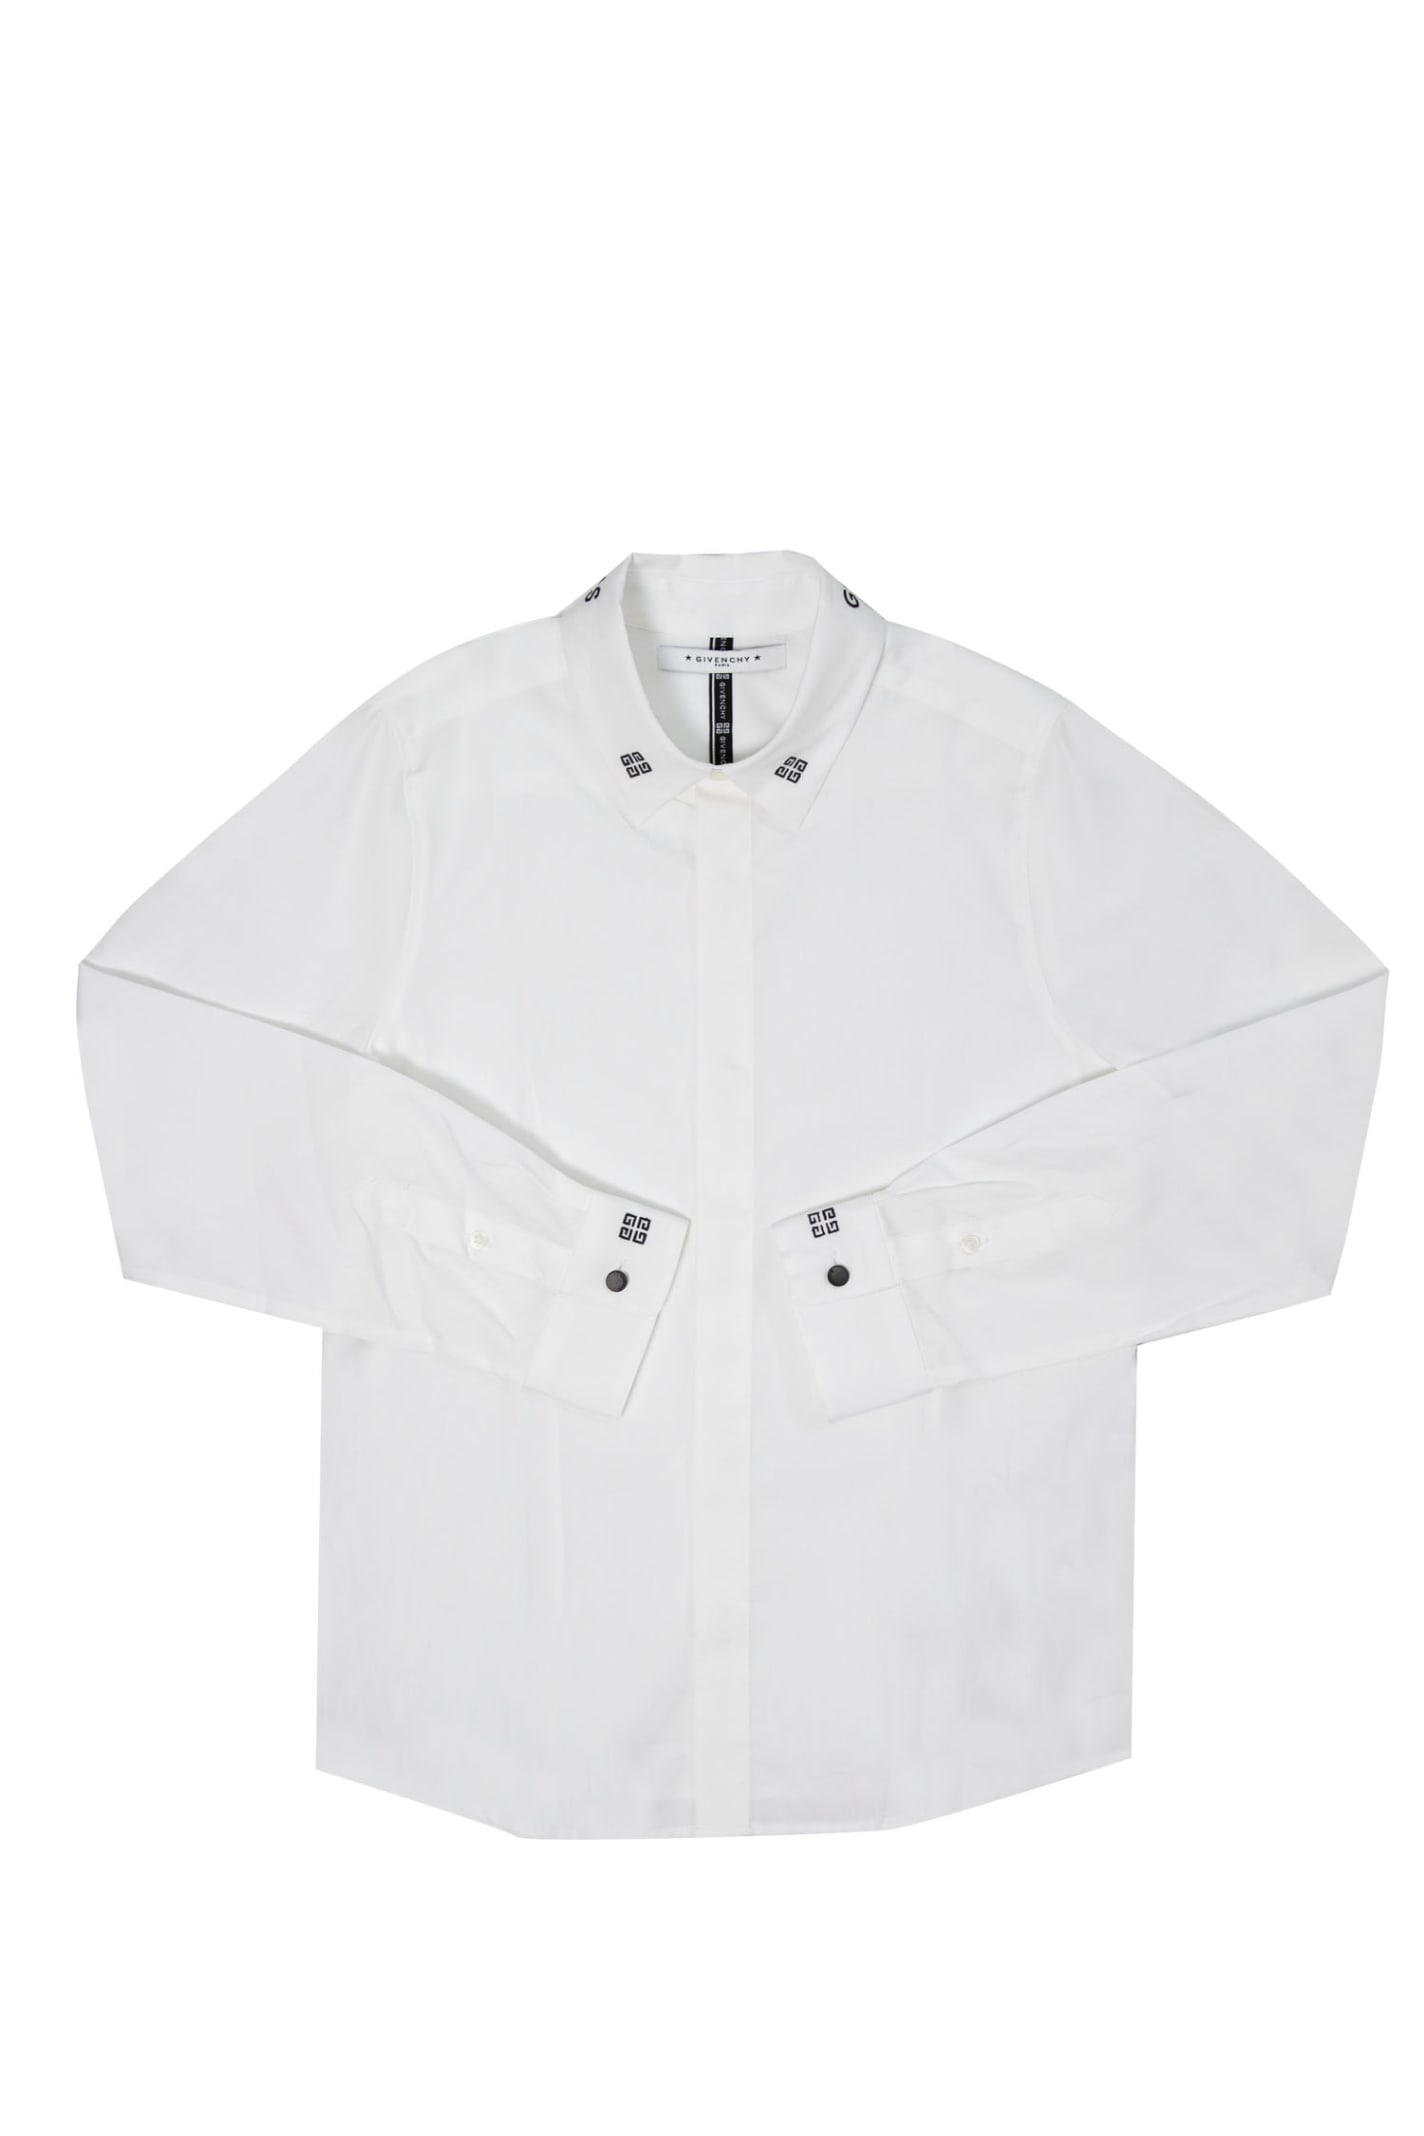 Givenchy Kids' Cotton Shirt In White